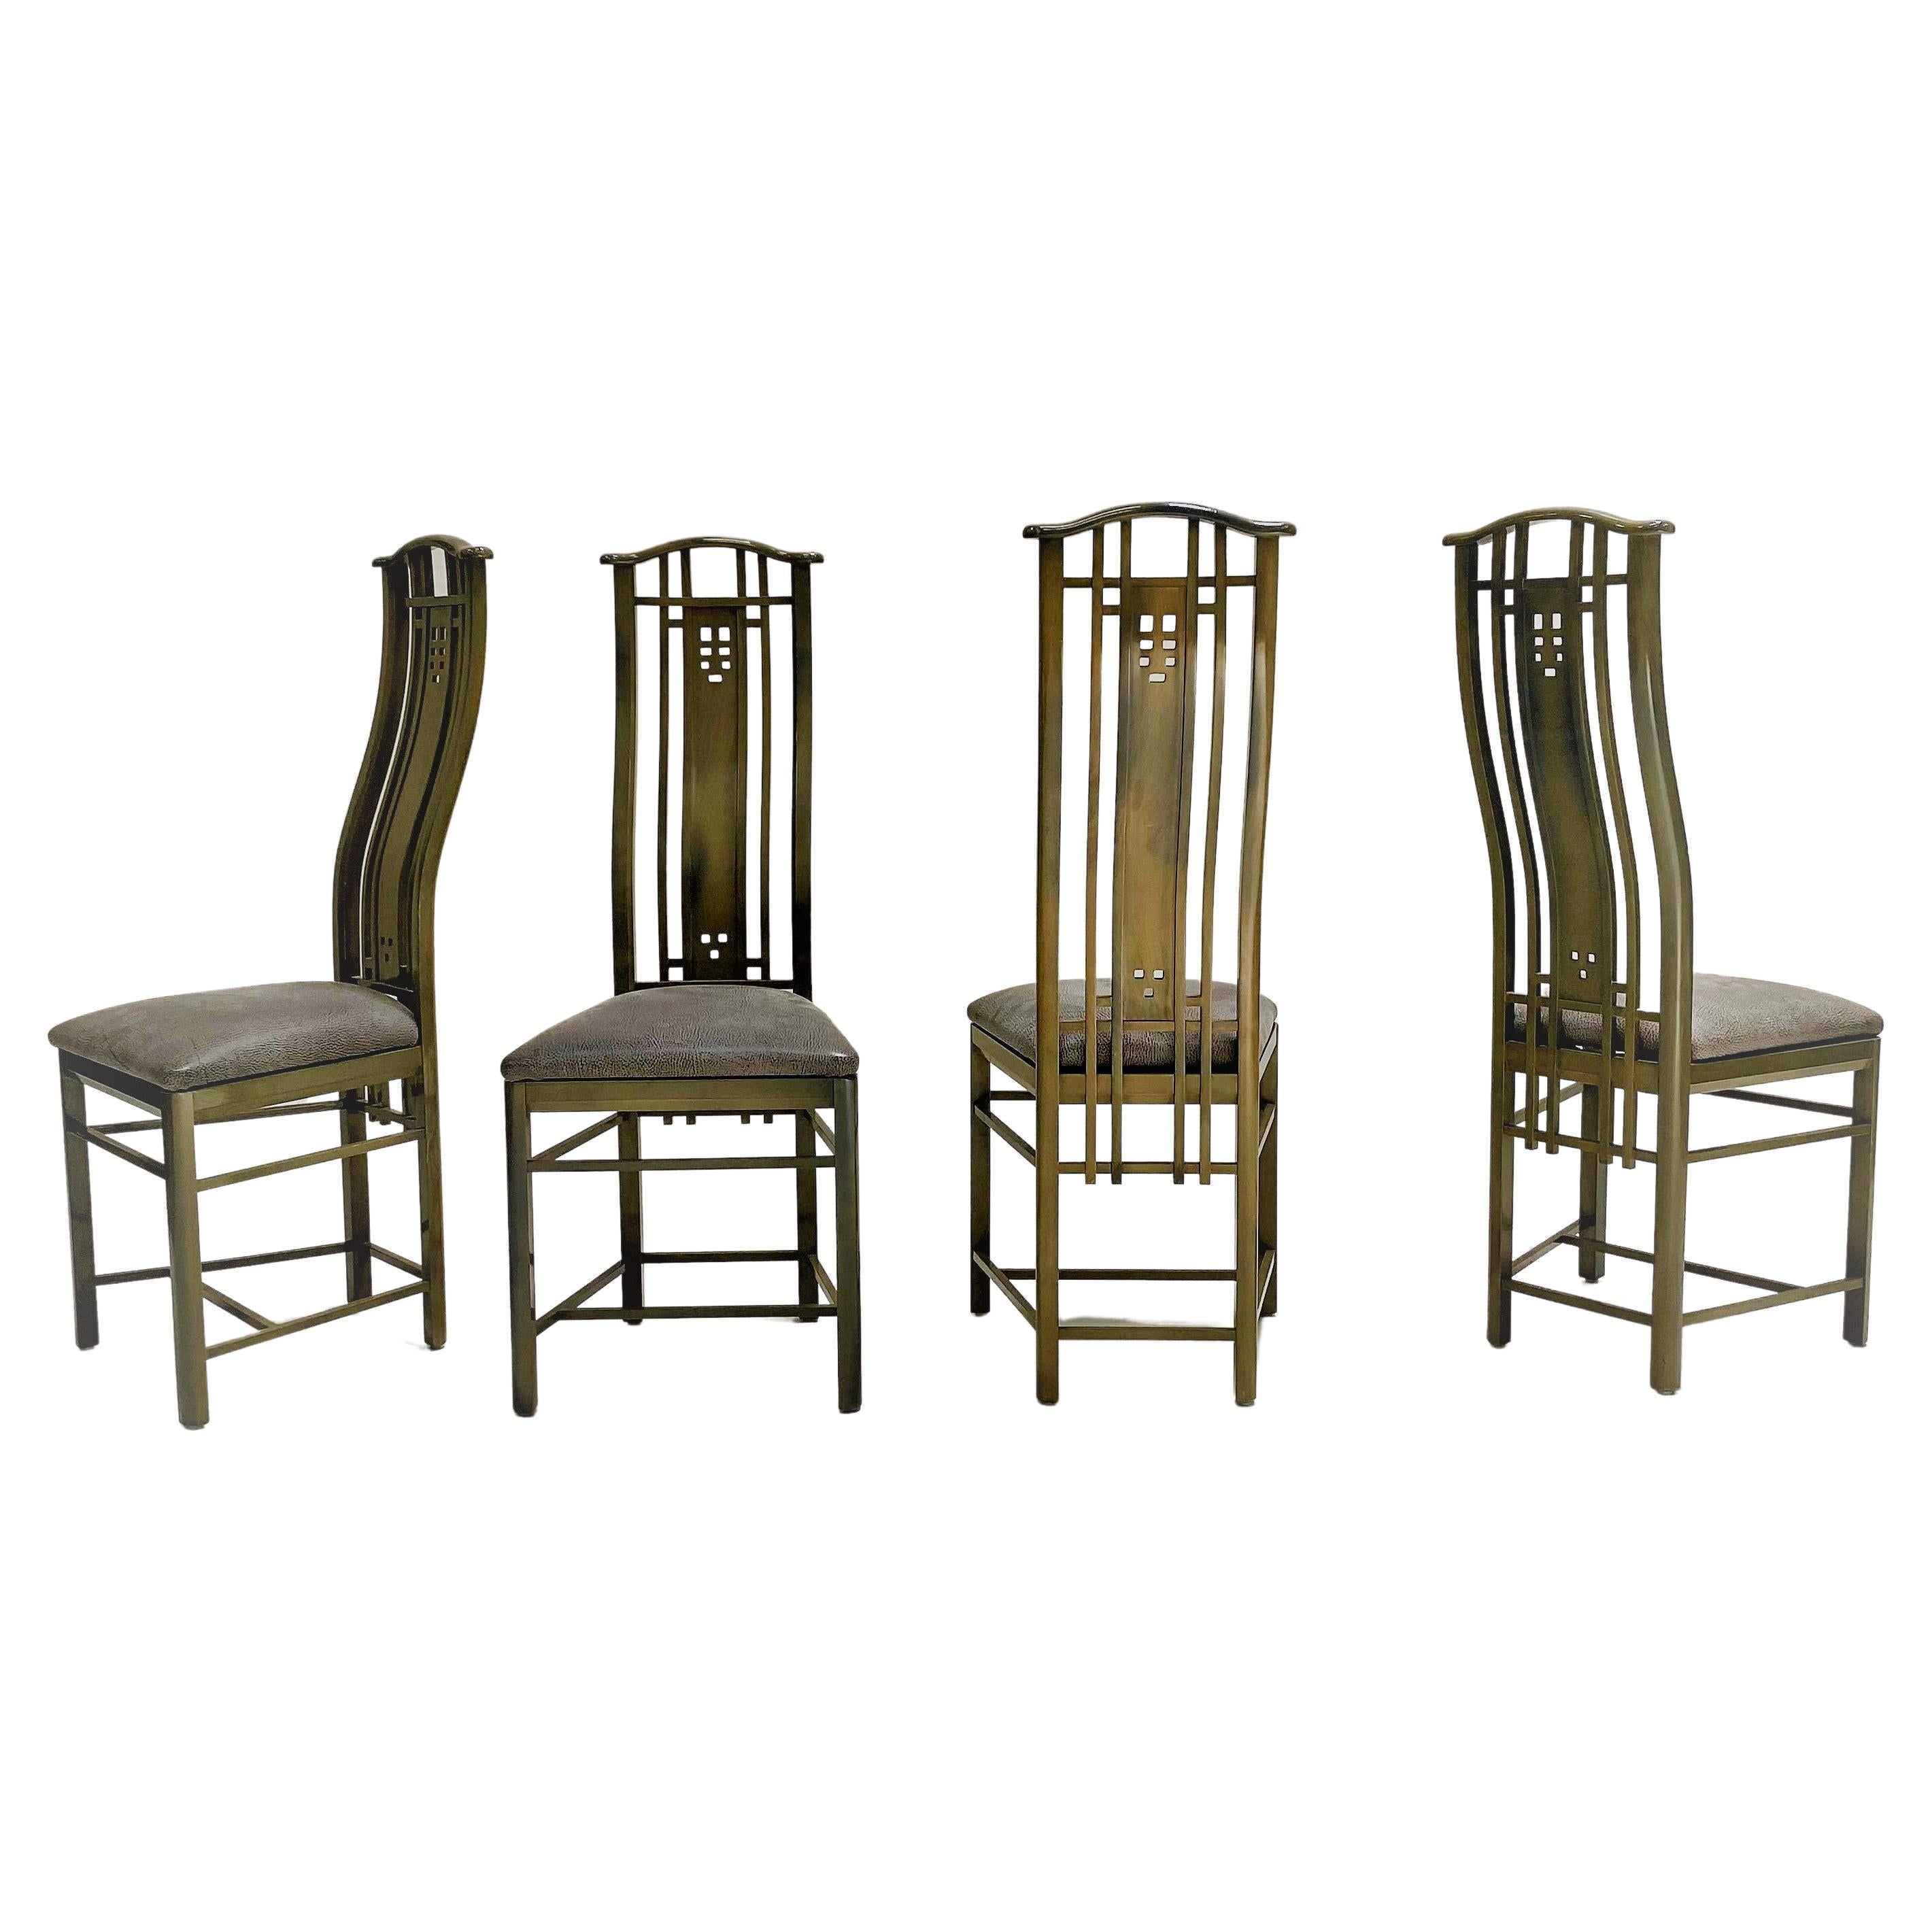 Set of 4 High Back Lacquered Dining Chairs by Umberto Asnago for Giorgetti, 1980 For Sale